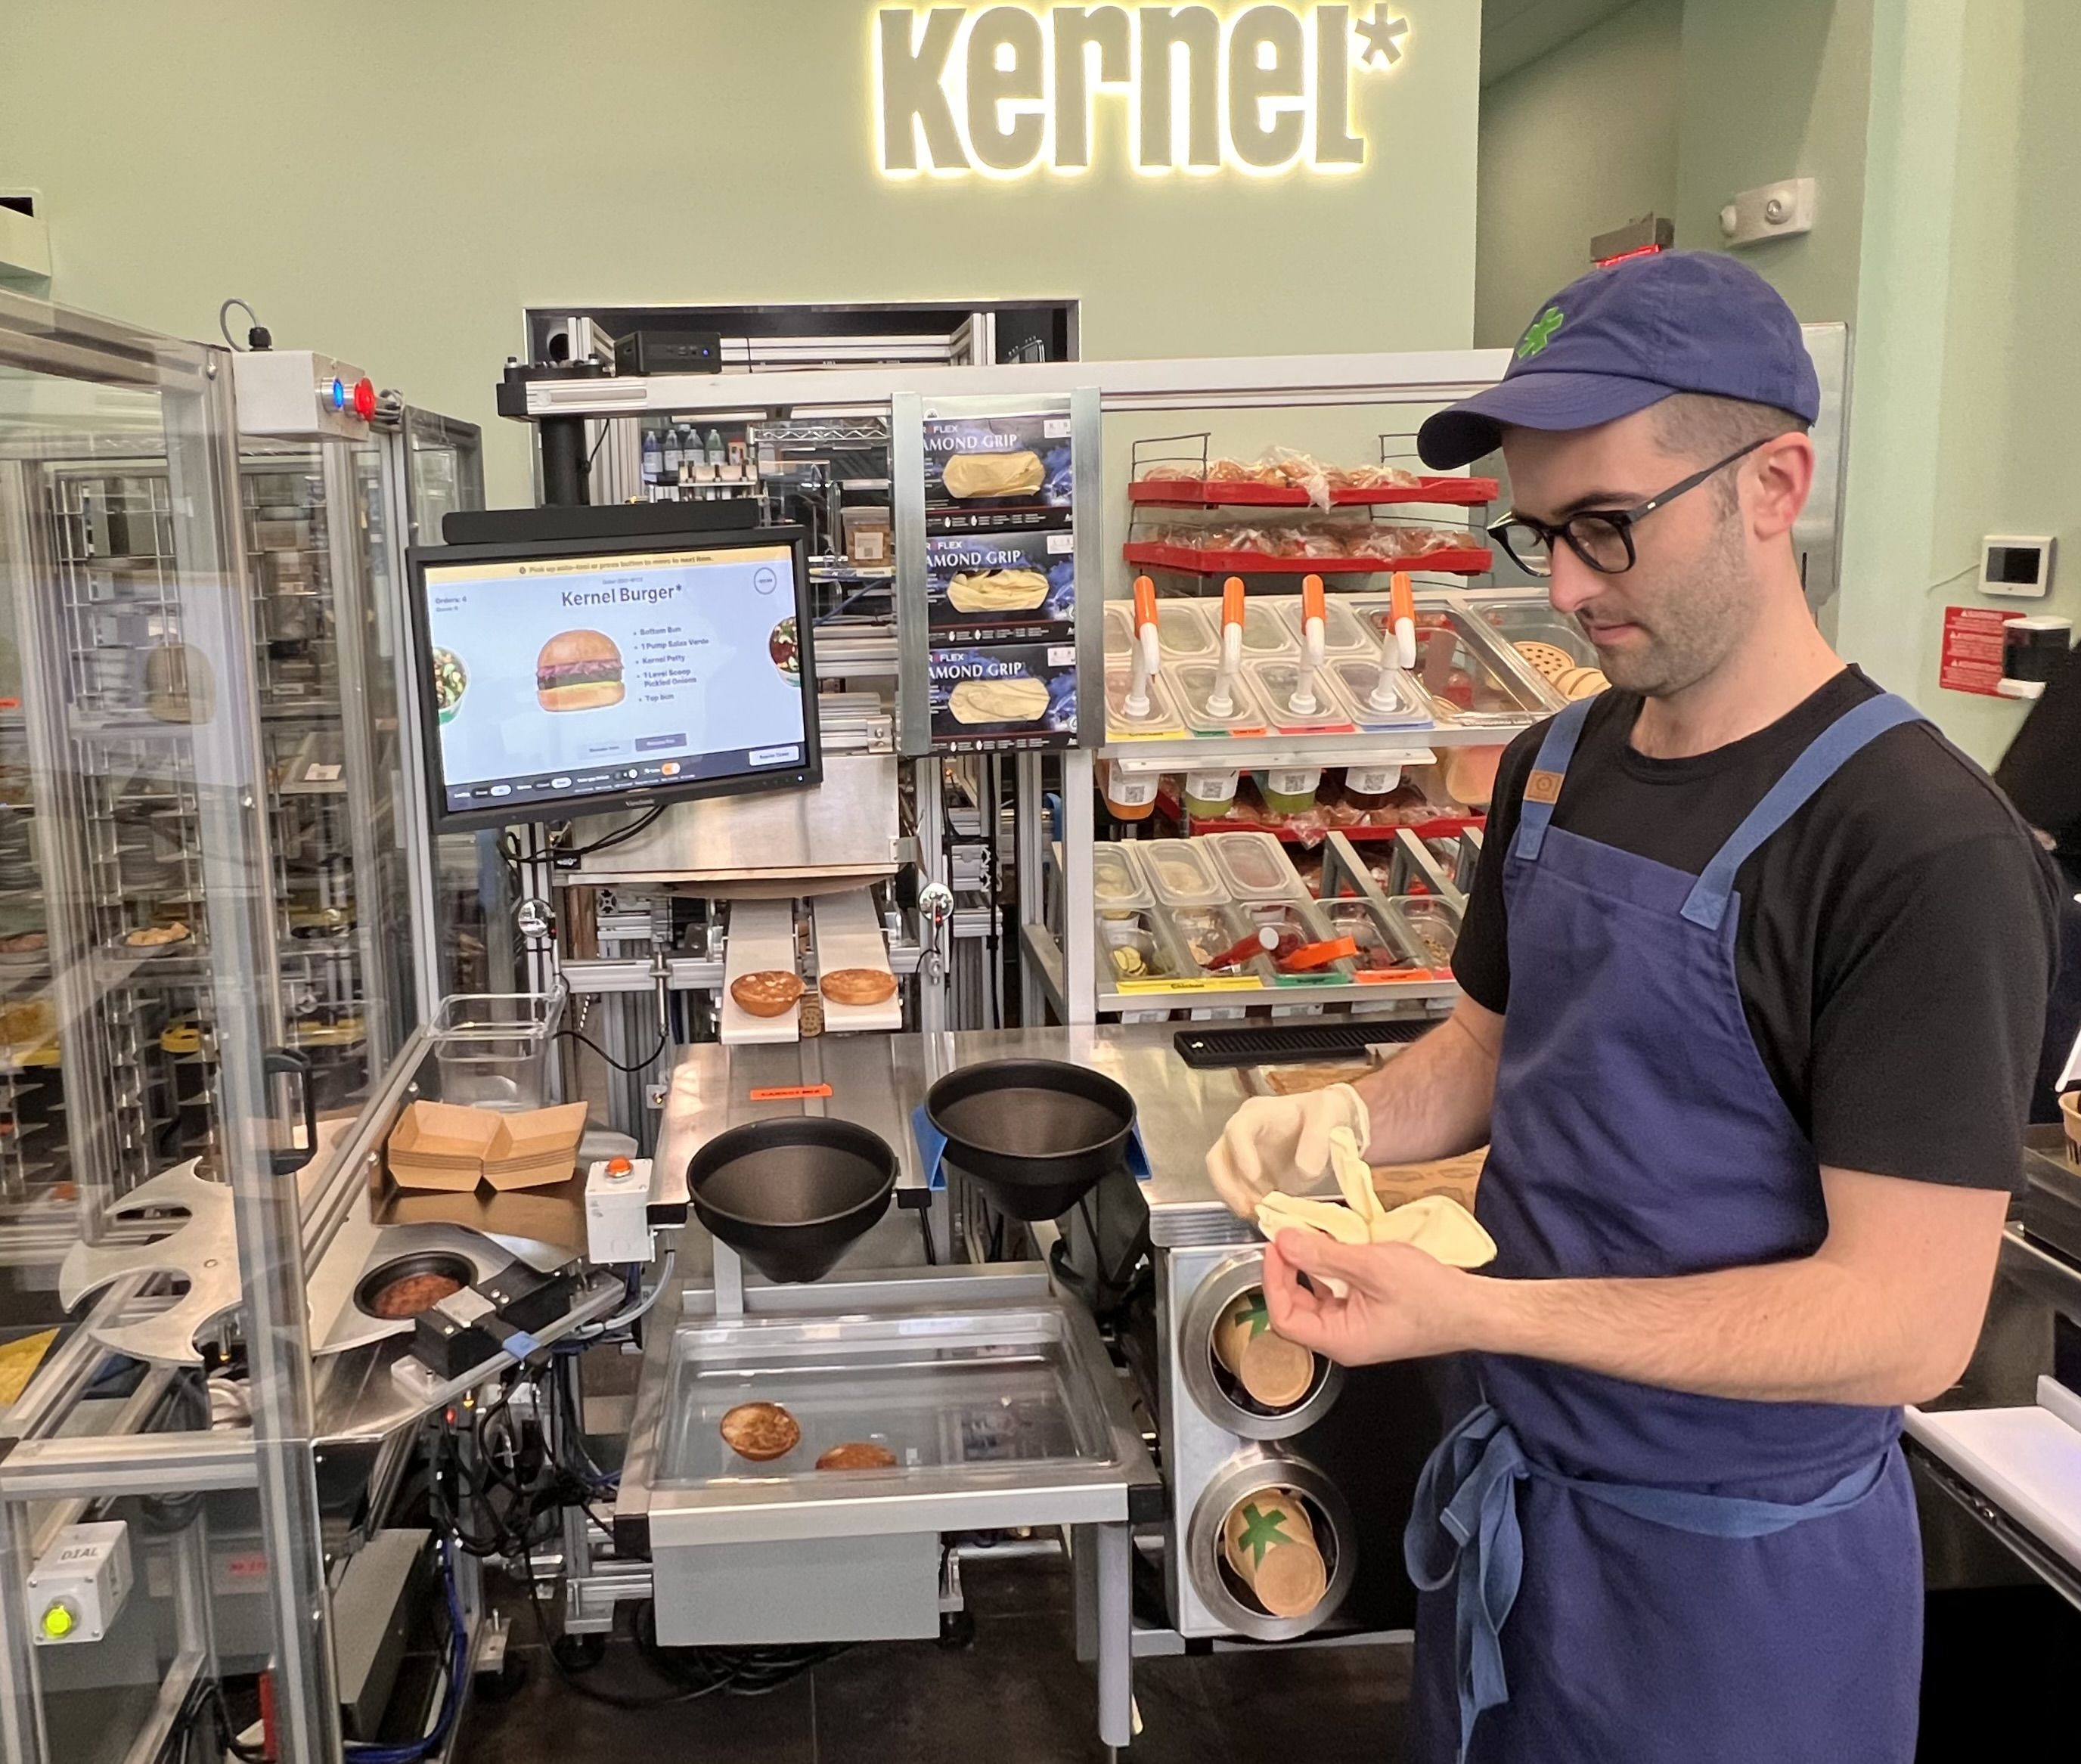 The chef at Kernel stands next to rows of ingredients and a screen displaying a burger.